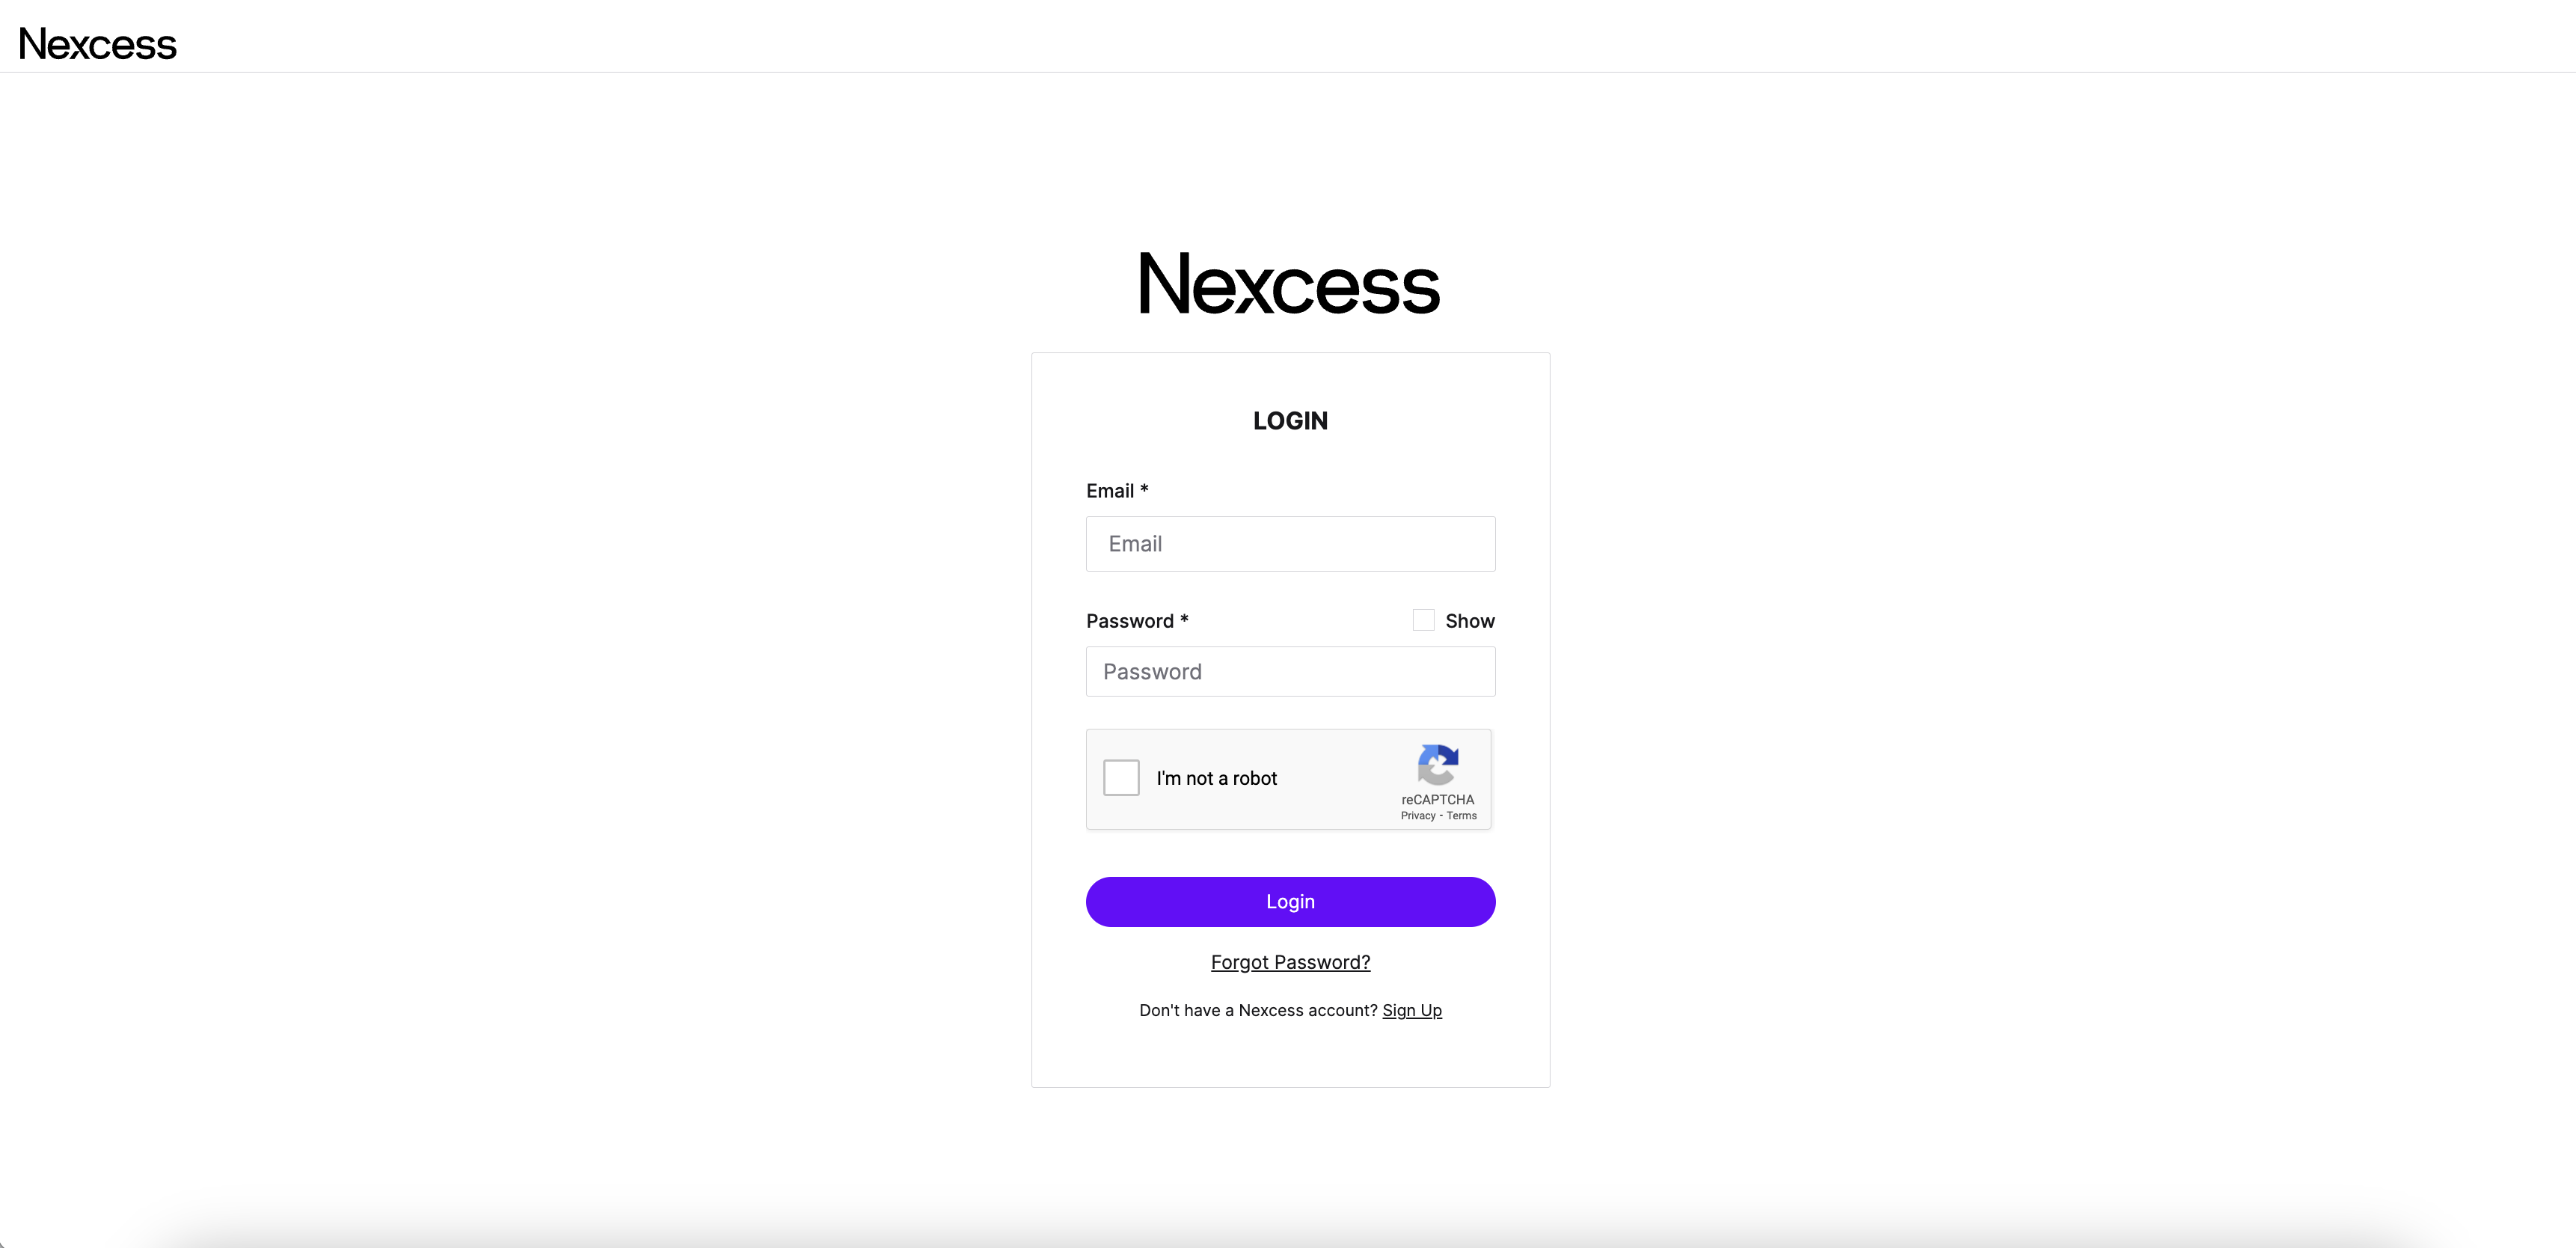 Step #1: Log in to the Nexcess client portal.